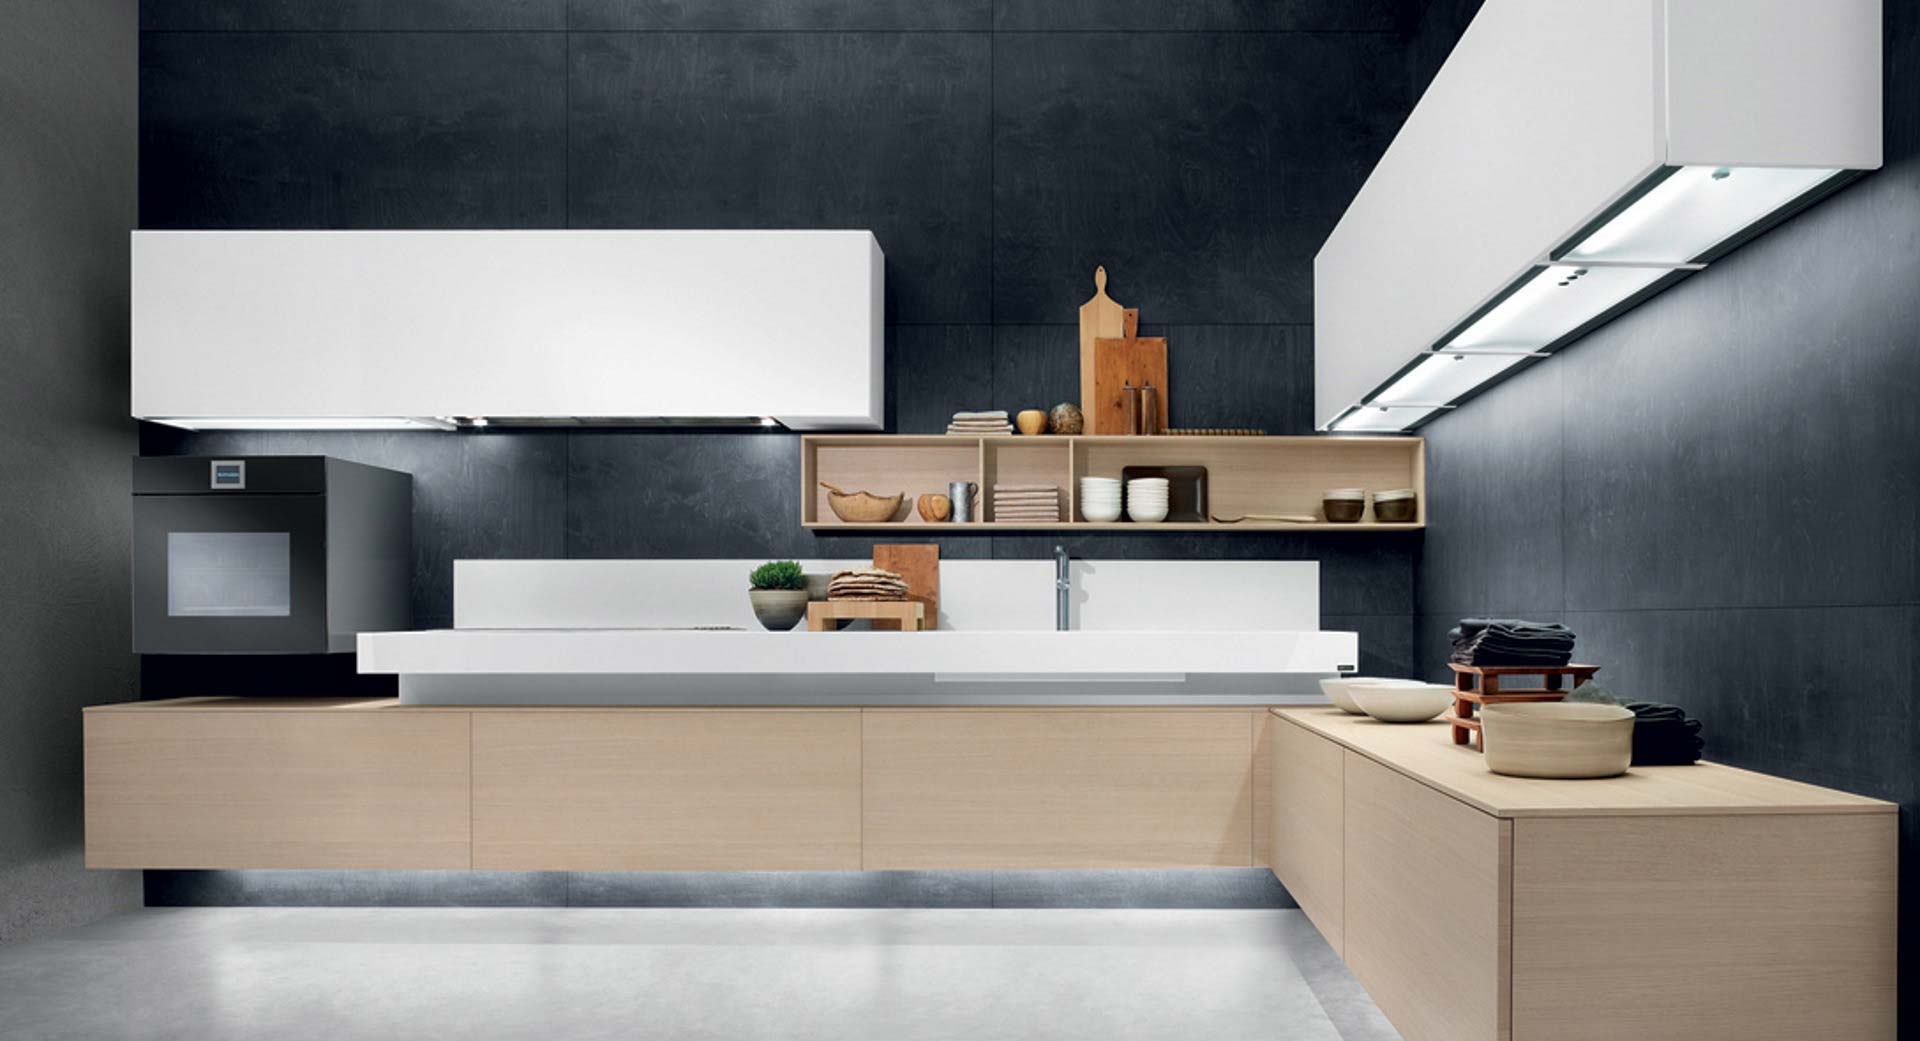 Why Are We So Attracted To Ultra Modern Kitchen Designs